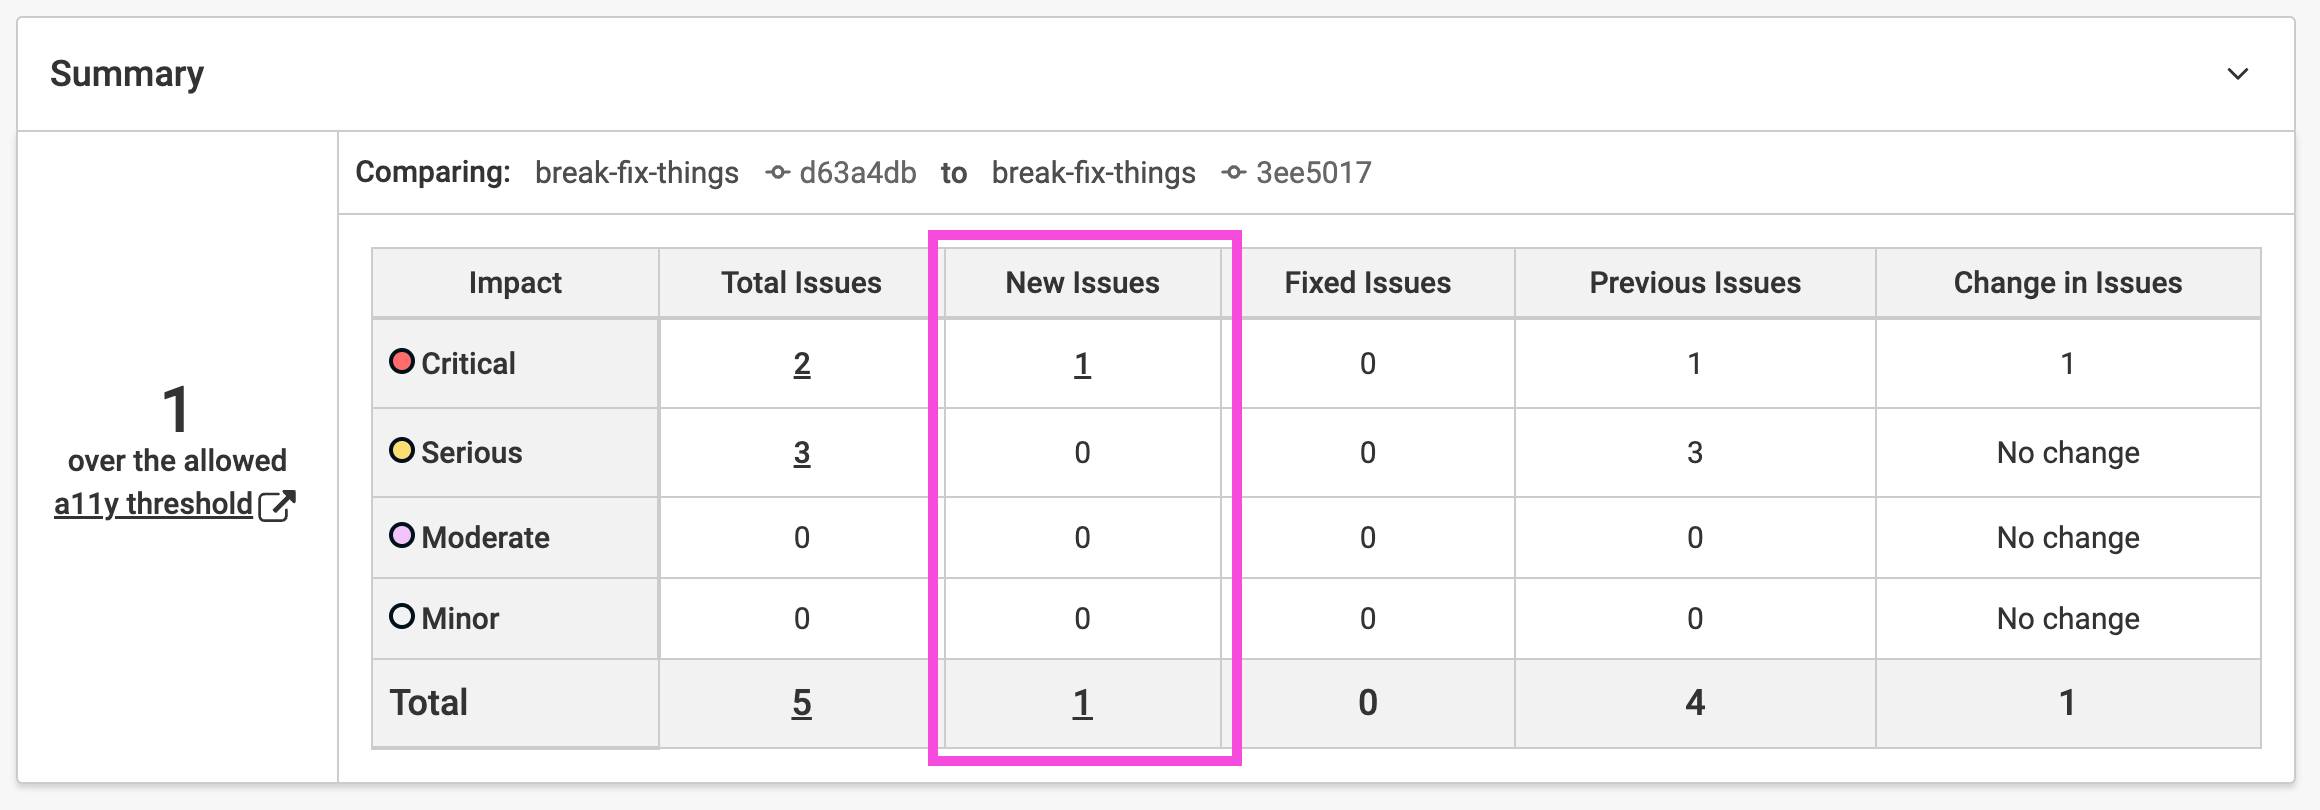 Screenshot of an axe Developer Hub report. Issues are shown in a table with impact shown as rows (critical, serious, moderate, minor) and issue classification shown as columns (total issues, new issues, fixed issues, previous issues, change in issues). The new issues column is highlighted with a pink border.